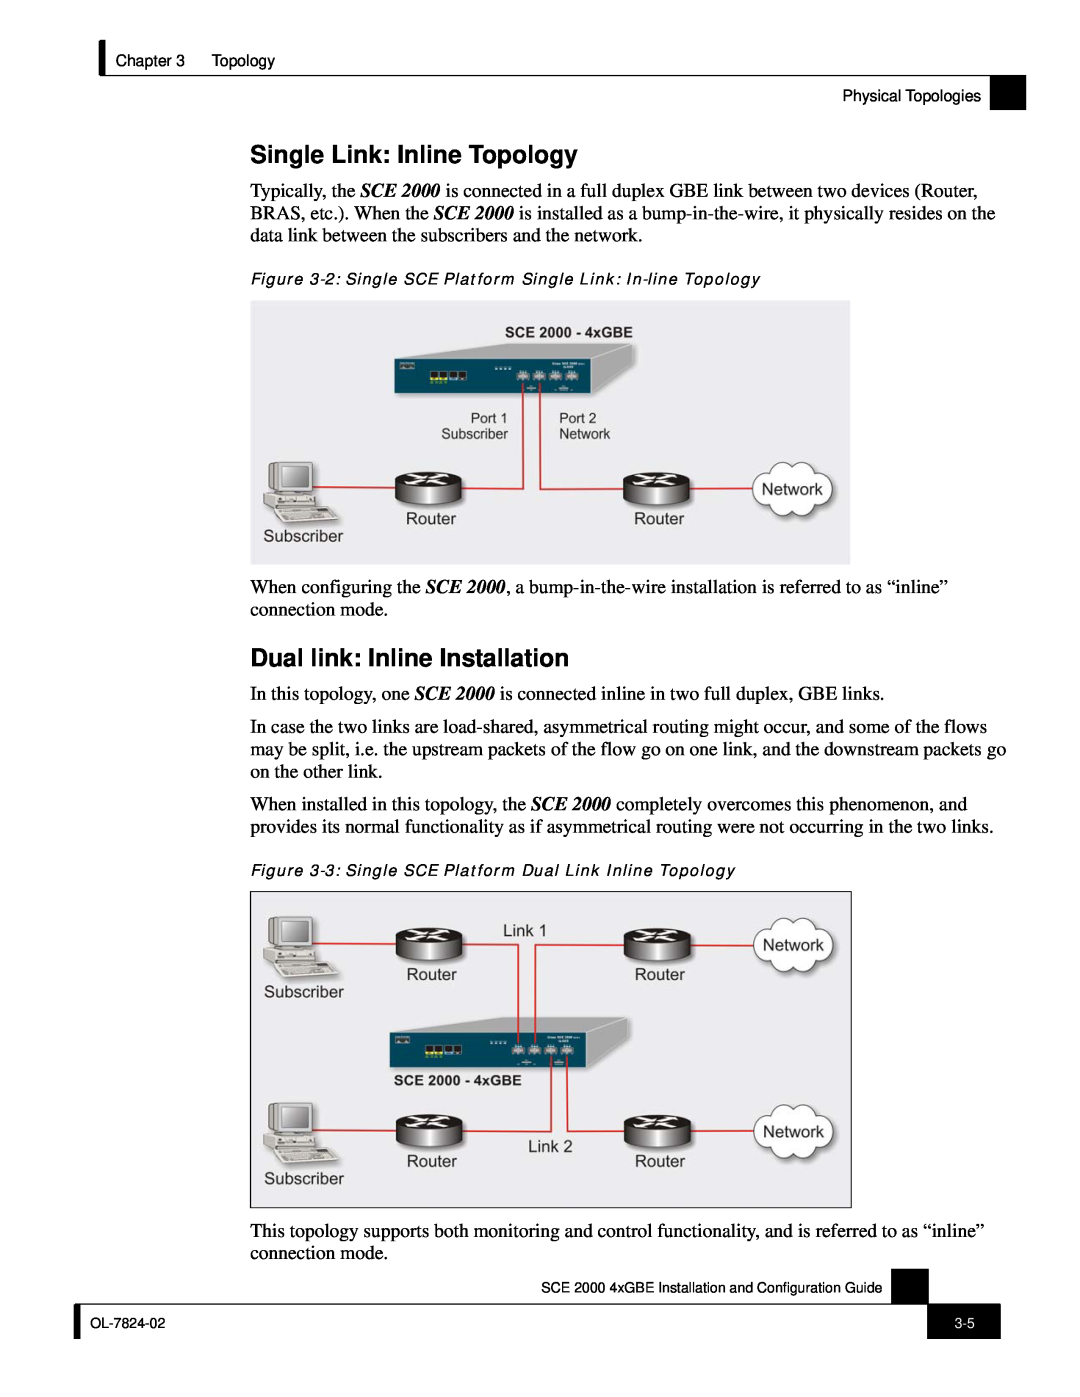 Cisco Systems SCE 2000 4xGBE manual Single Link Inline Topology, Dual link Inline Installation 